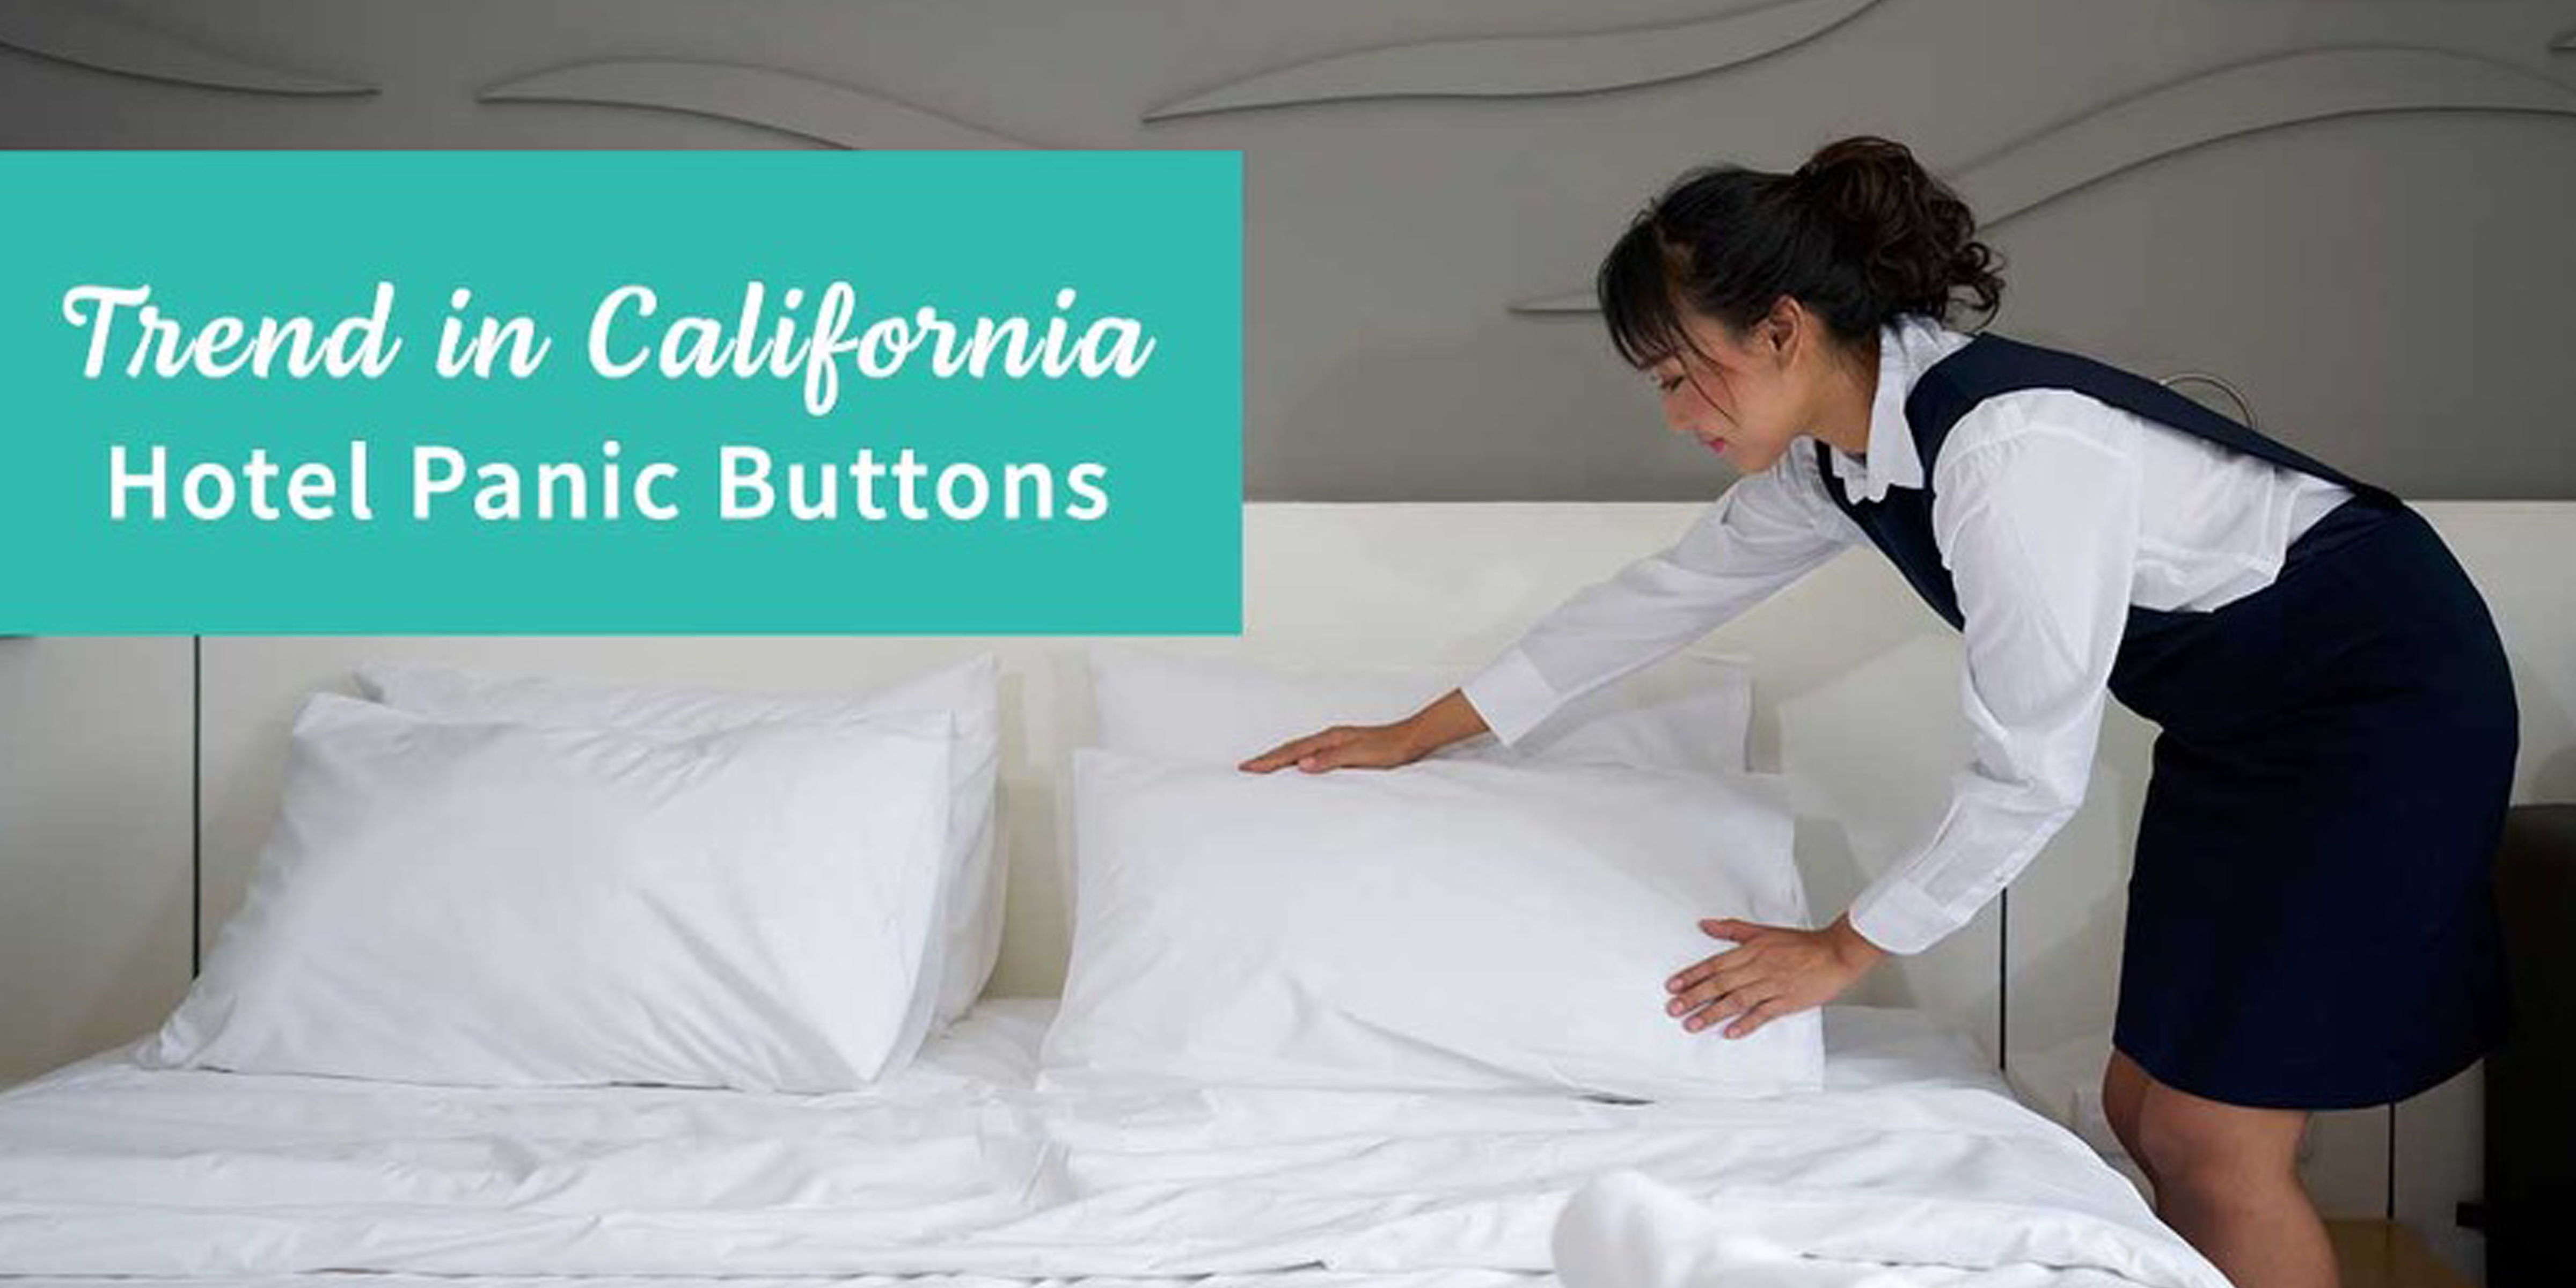 The Rising Trend of Hotel Panic Buttons in California